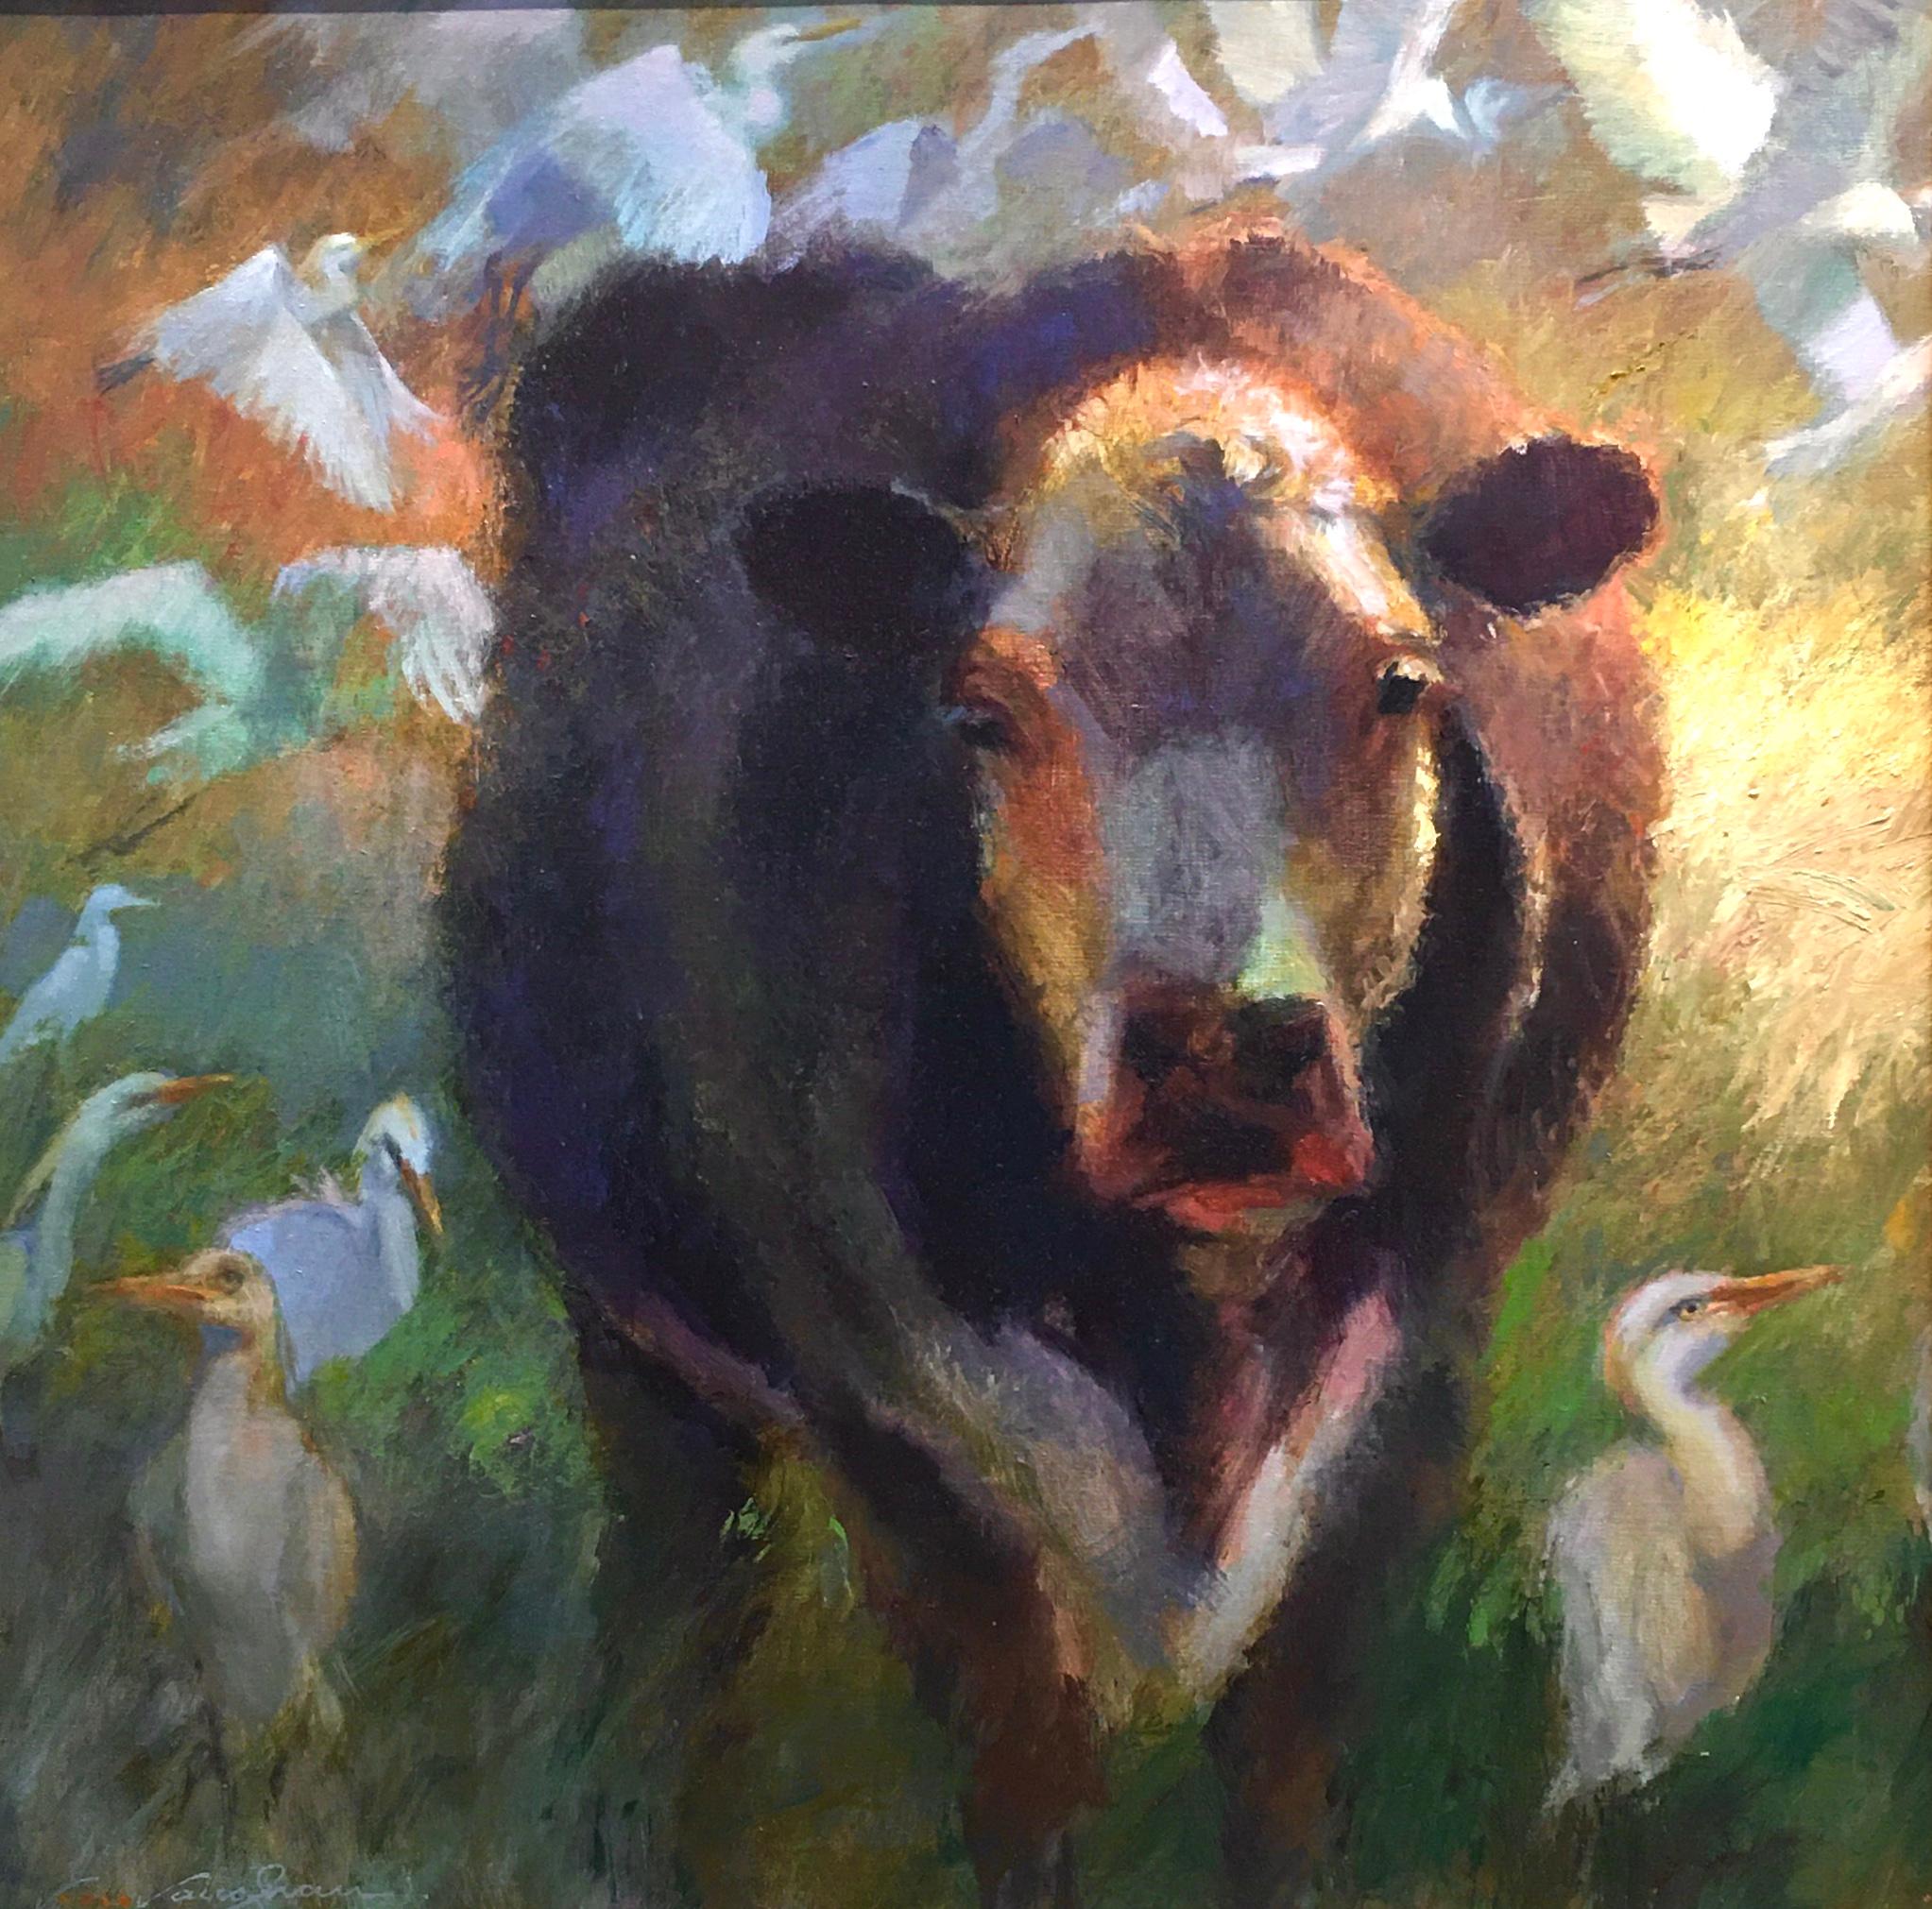 Virginia Vaughan  Landscape Painting - With Few Egrets, Texas Cattle, Impressionism Texas Ranches, Texas Artist, No Egrets